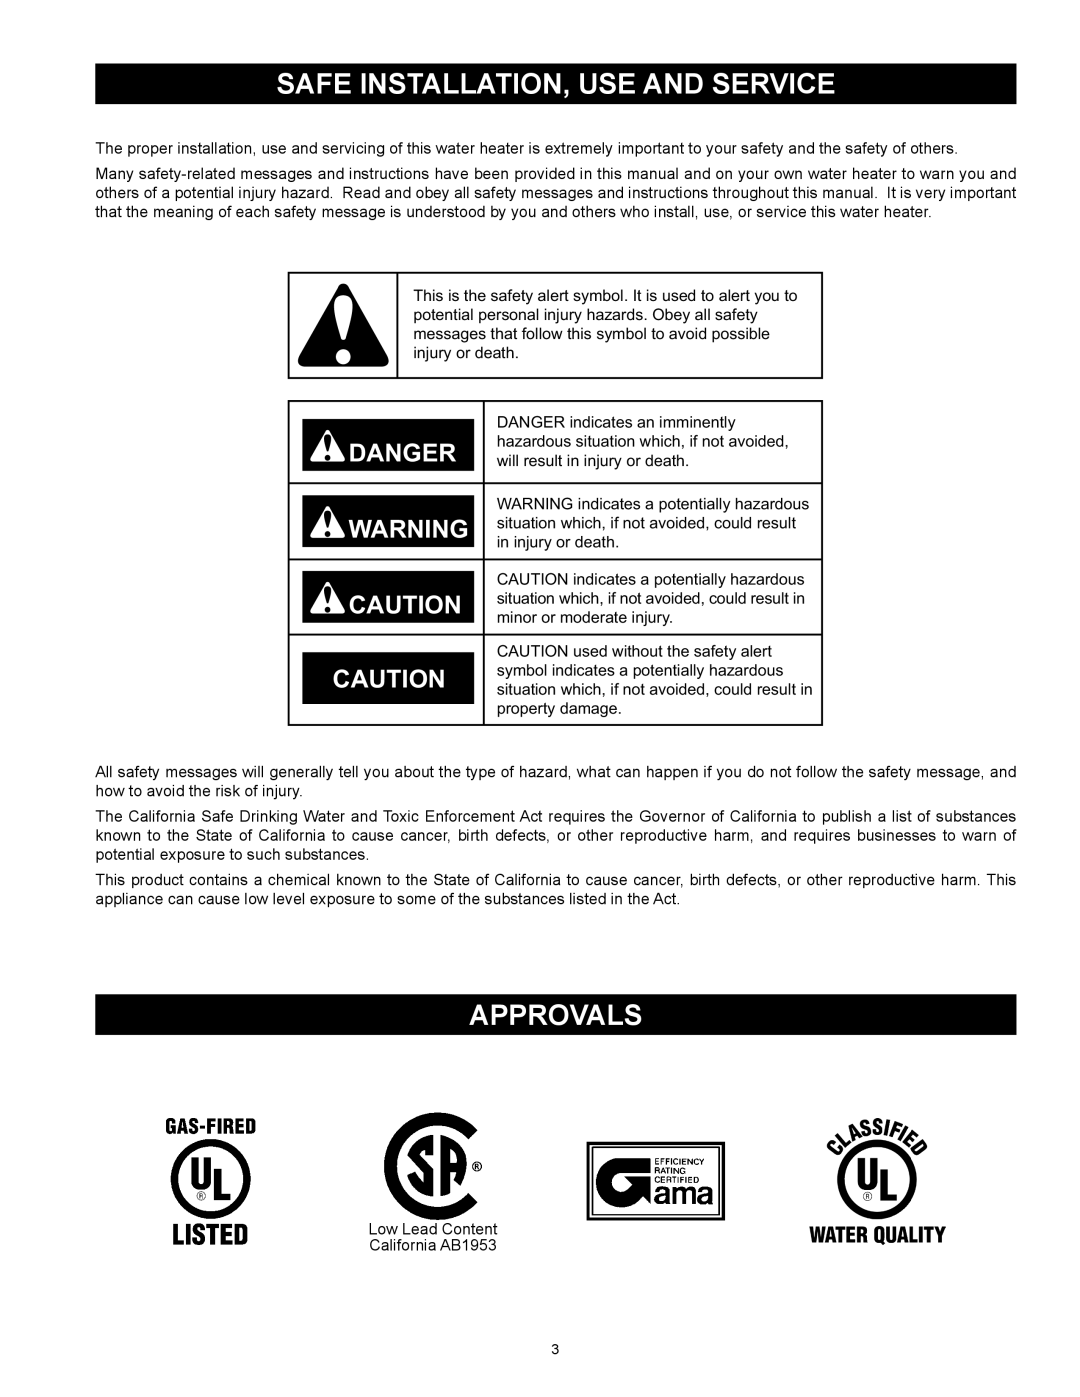 Reliance Water Heaters N71120NE, N85390NE instruction manual Safe Installation, Use and Service, Approvals, Danger 